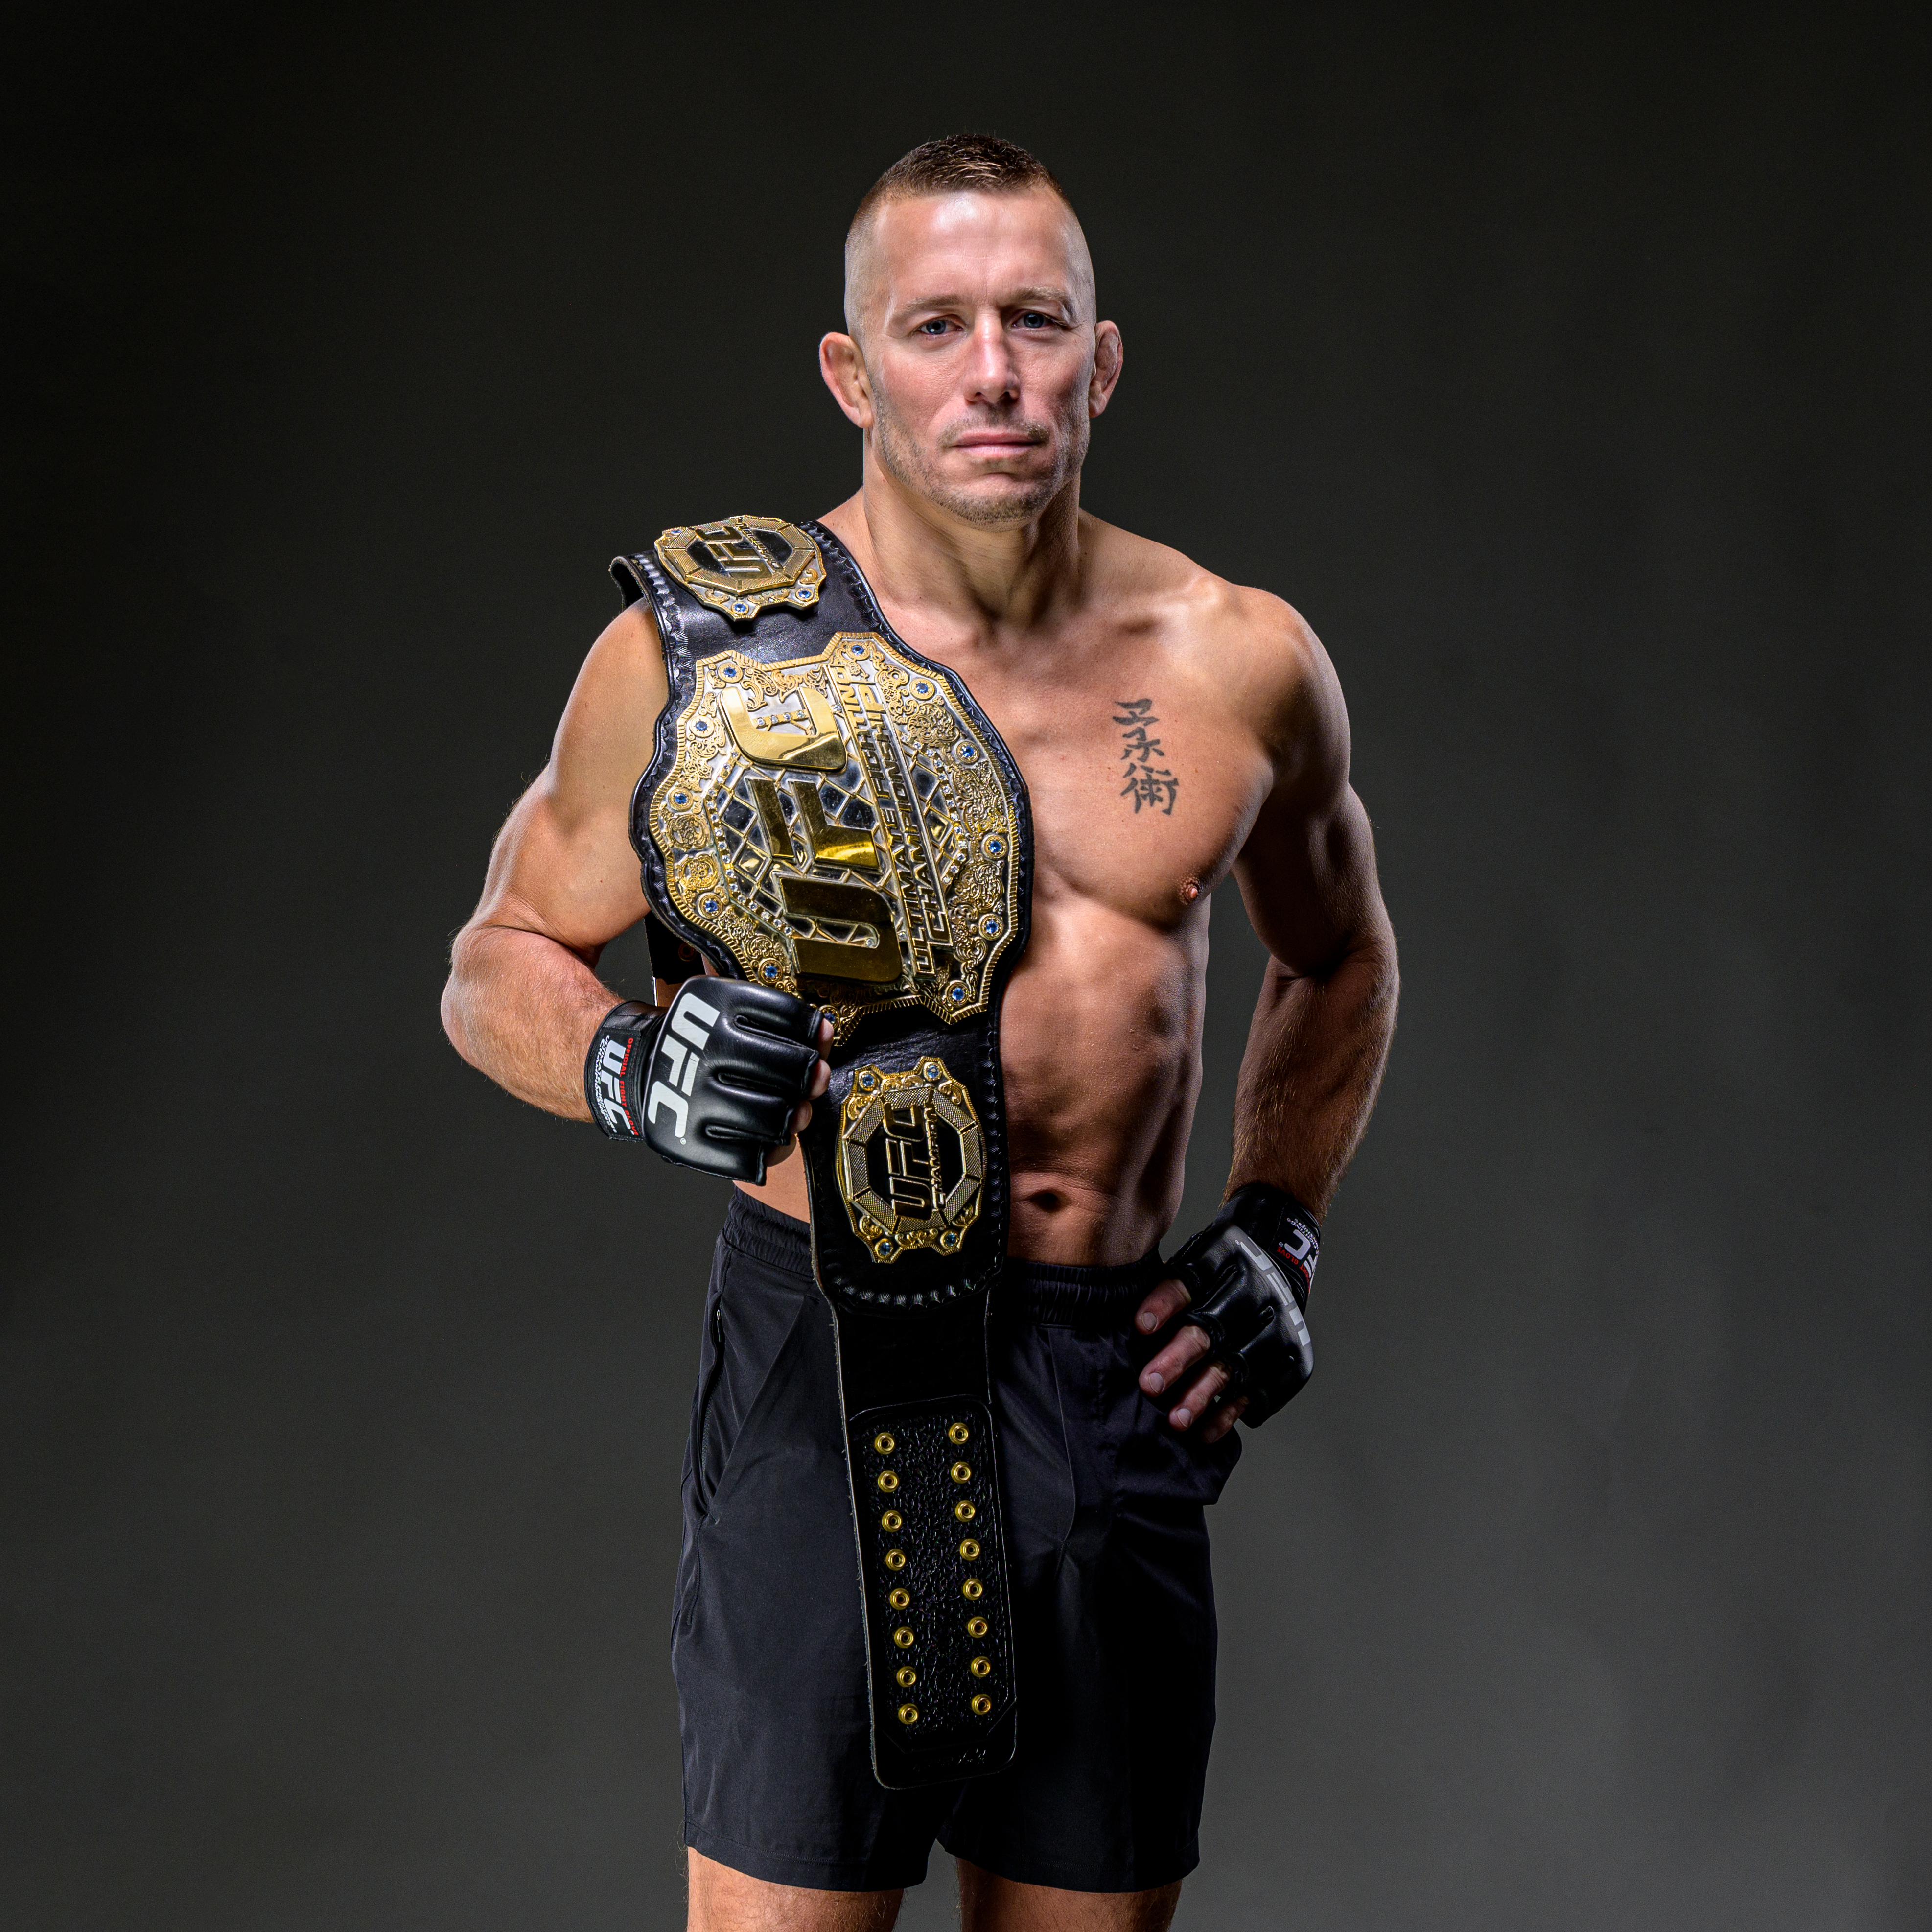 Hall of Famer Georges St-Pierre